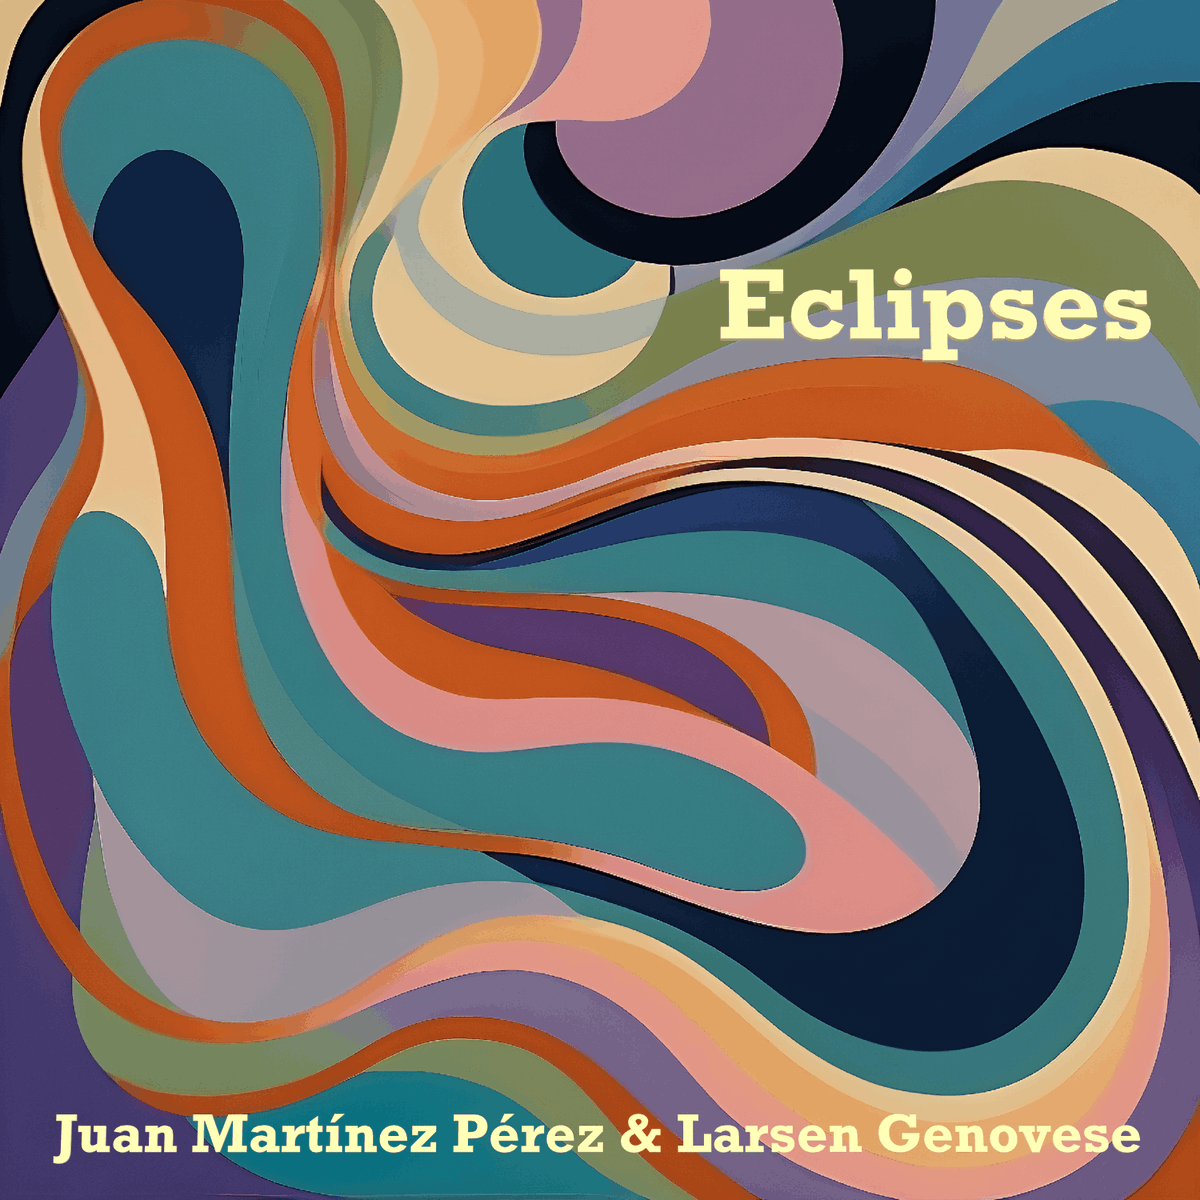 Upcoming: 'Eclipses' It is the title track of our EP 'Foreign Tales', set to be released on April 5th. EP features six duets for acoustic guitar and violin. Pre-save link: gyro.to/ForeignTales @pandoraAMP @Spotify @amazonmusic @AppleMusic #guitar #violin #duets